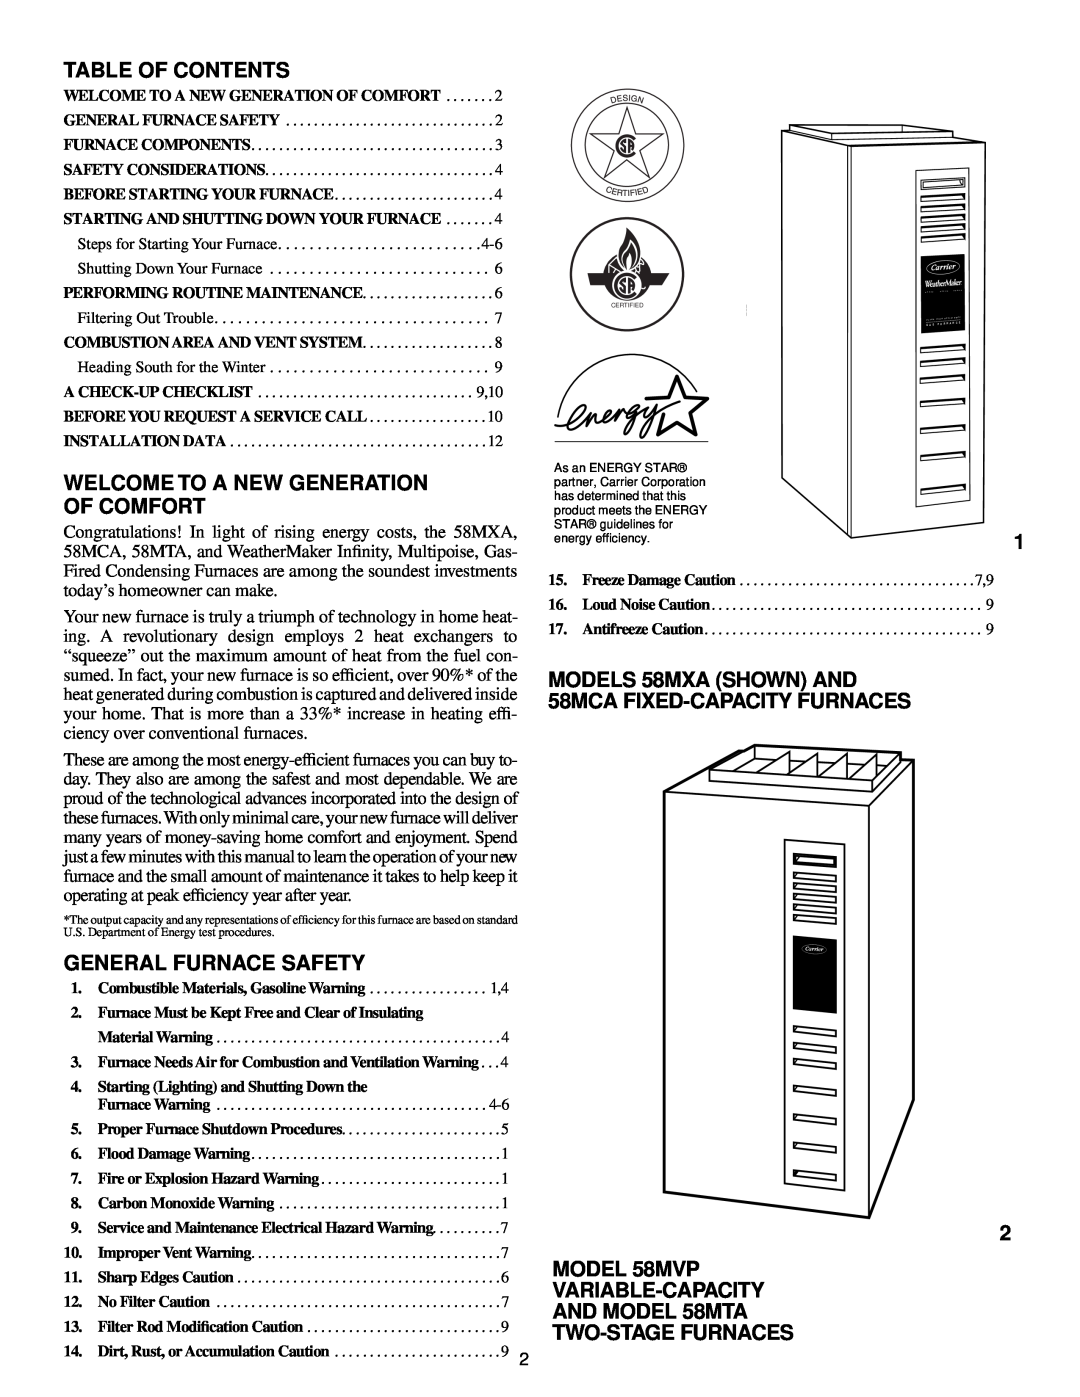 Carrier 58MXA Table Of Contents, Welcome To A New Generation Of Comfort, General Furnace Safety, ed art, Two-Stagefurnaces 